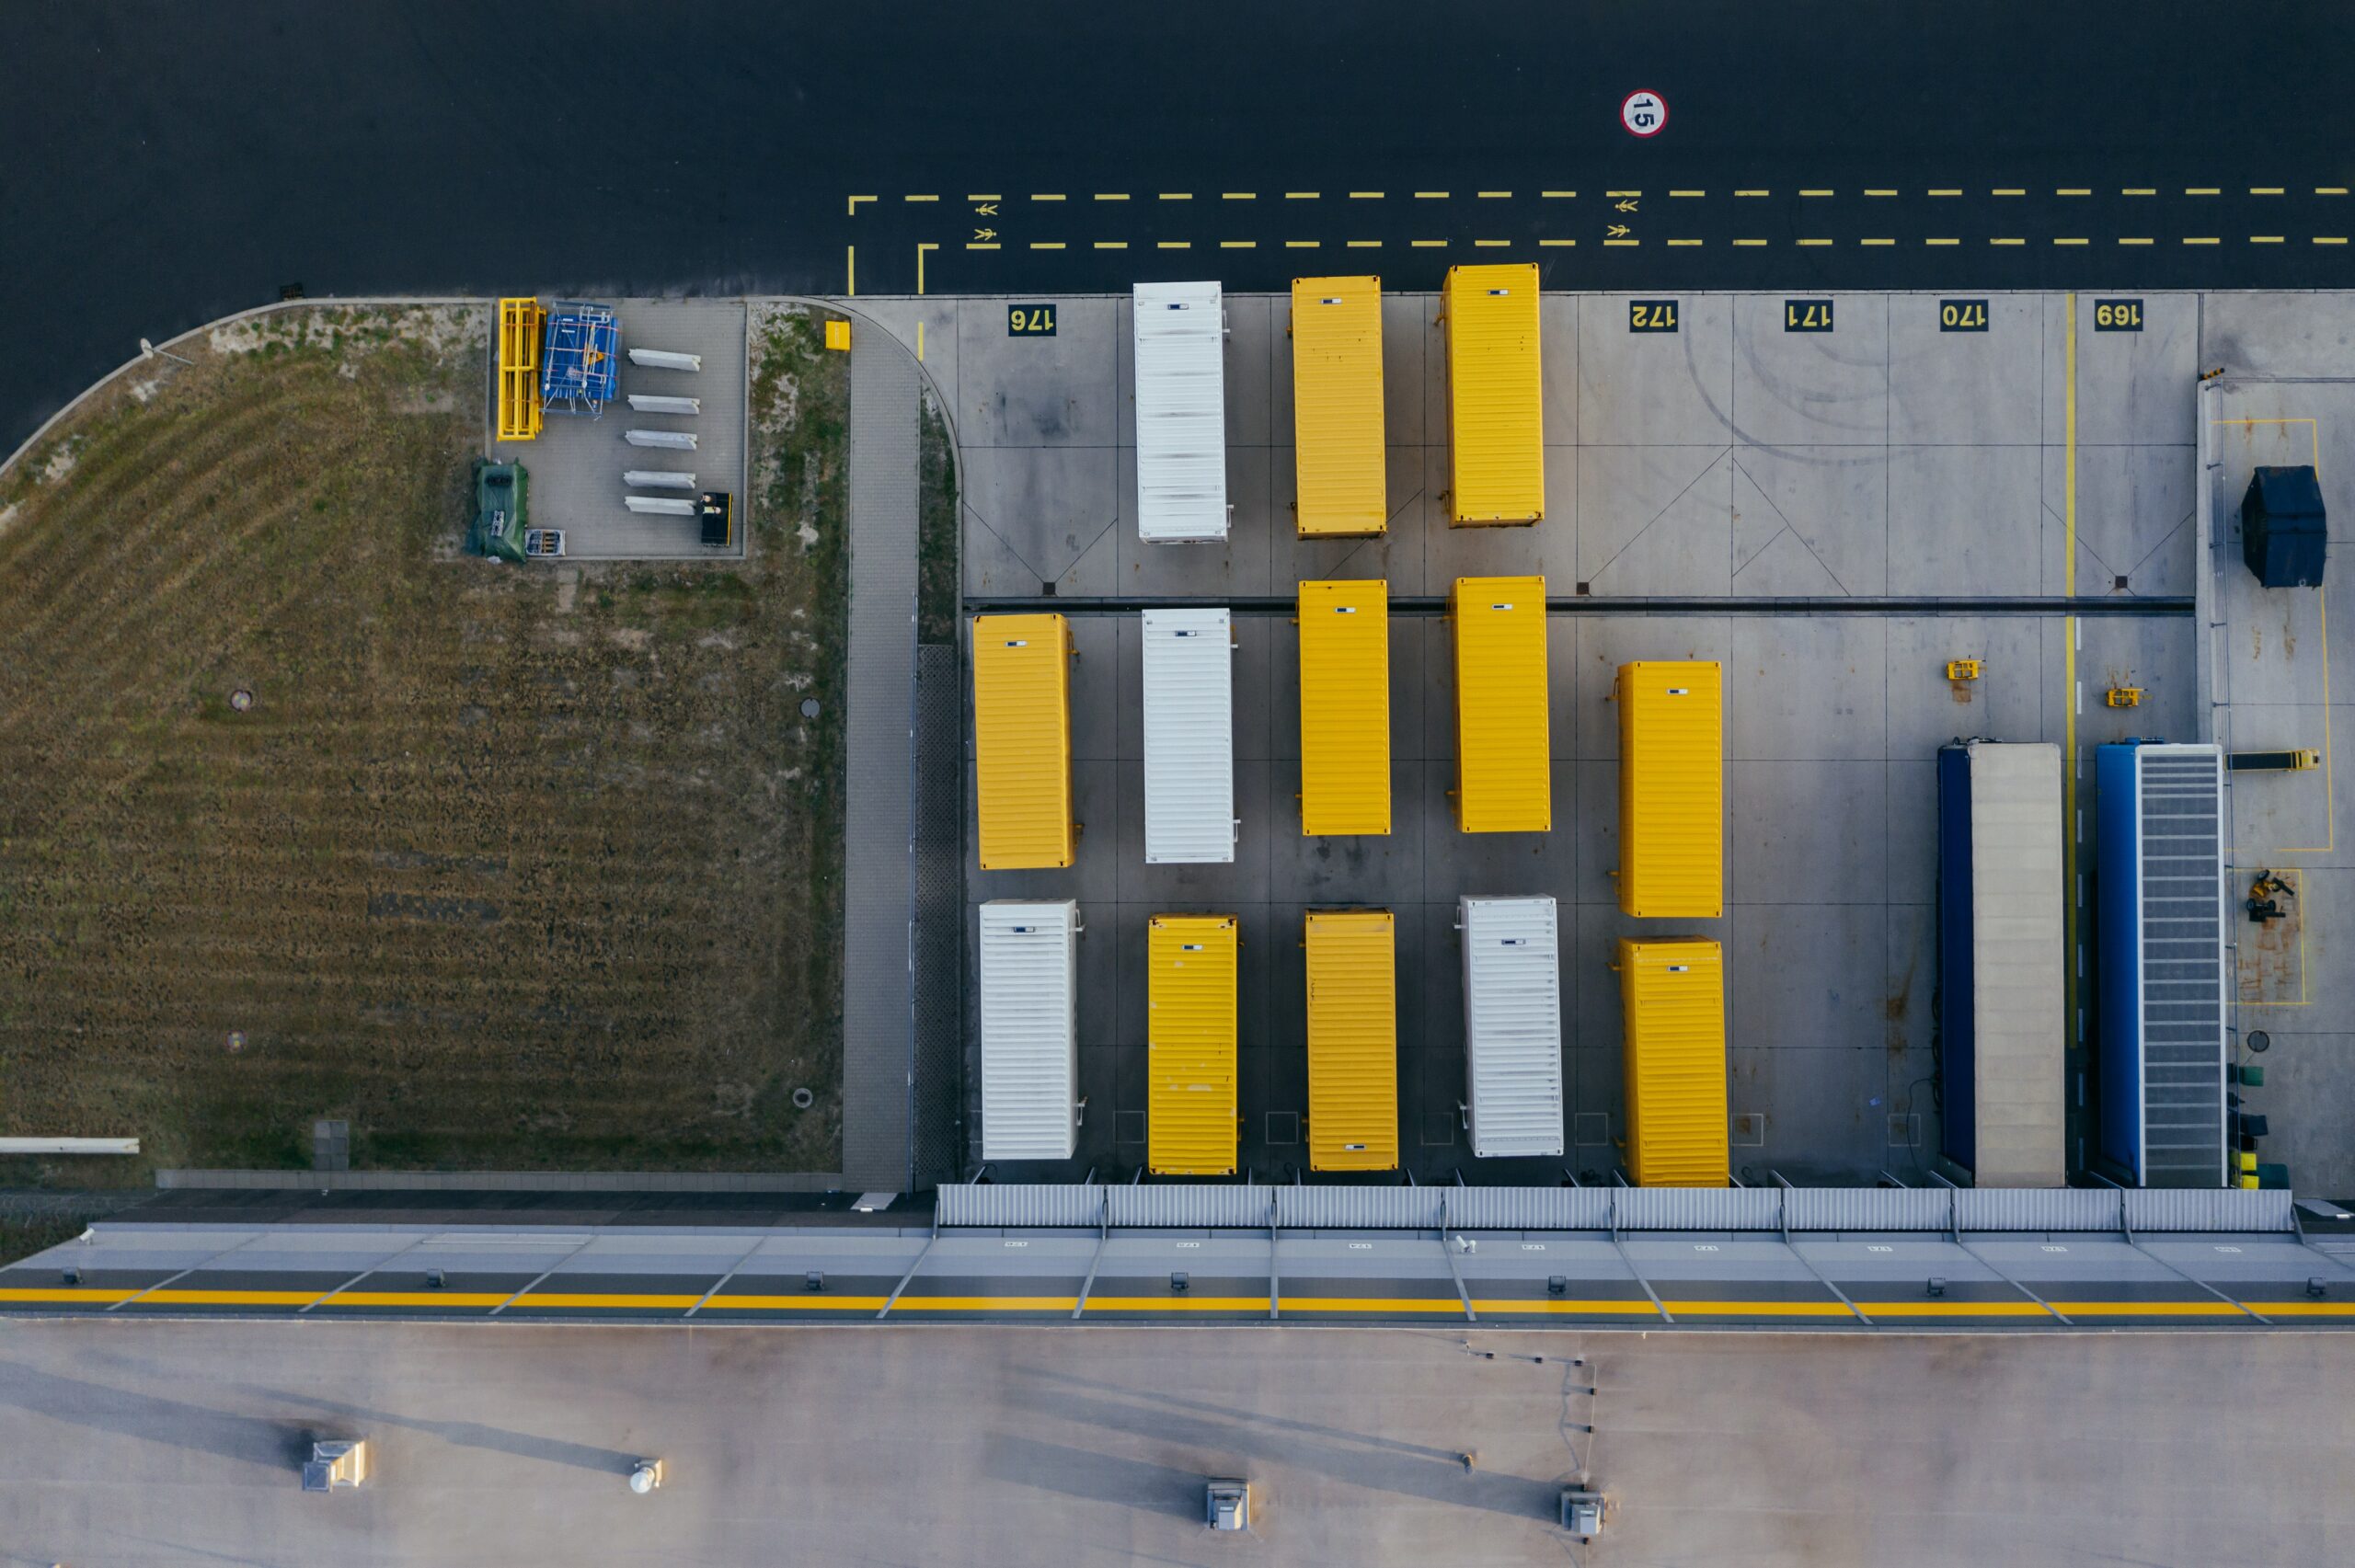 https://www.accorddata.it/wp-content/uploads/2020/06/aerial-photography-of-a-containers-2797828-scaled.jpg